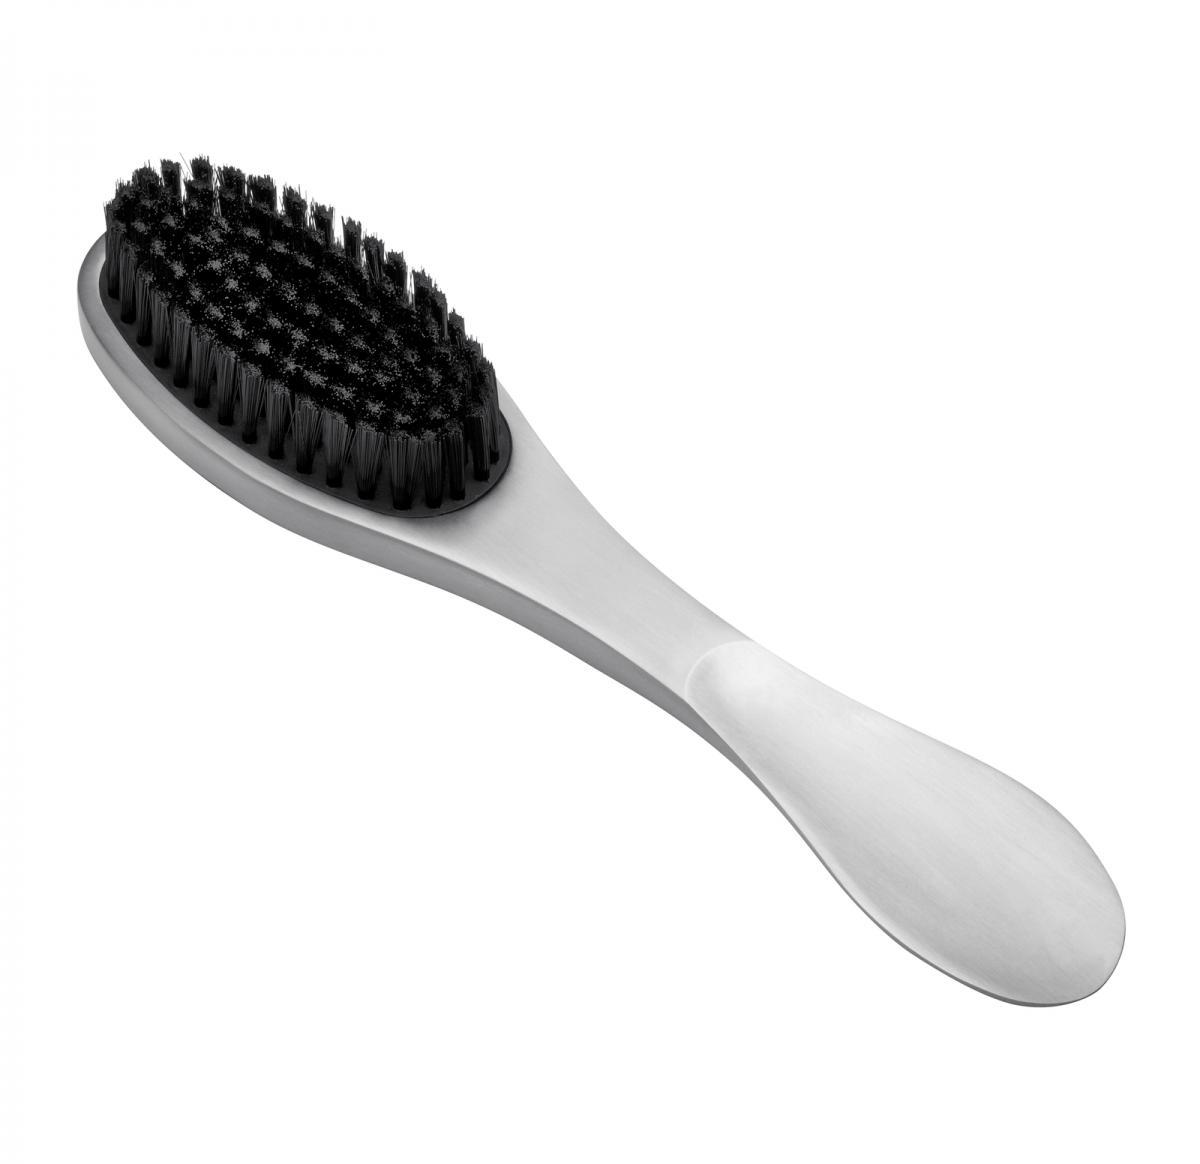 Clothbrush with shoehorn -LULEA